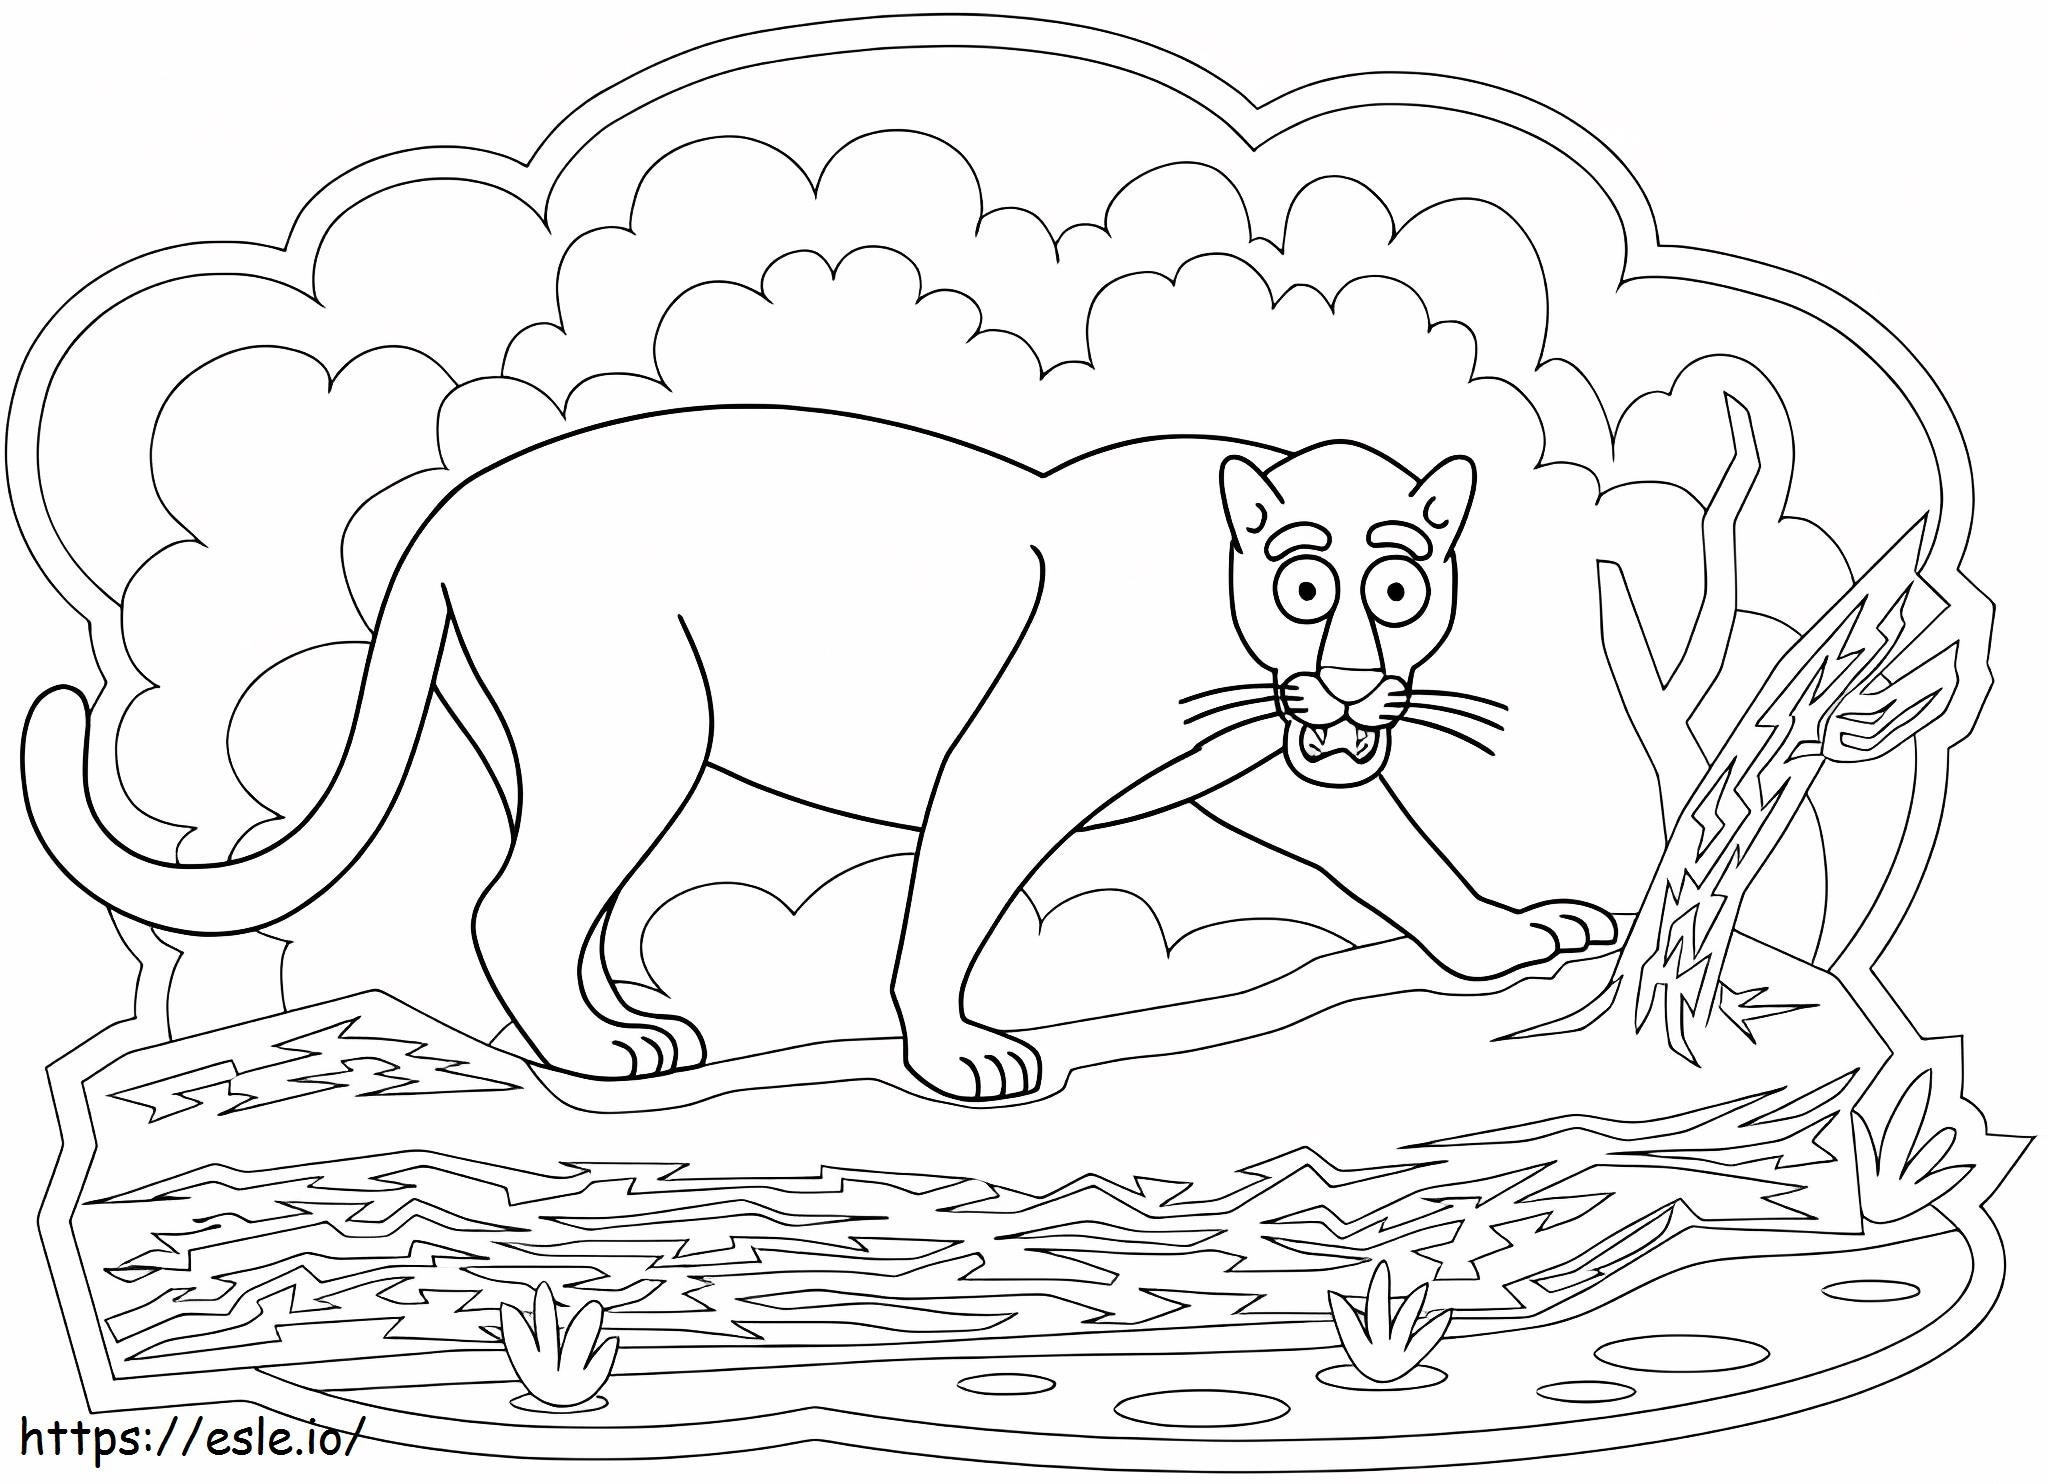 Stupid Panther coloring page